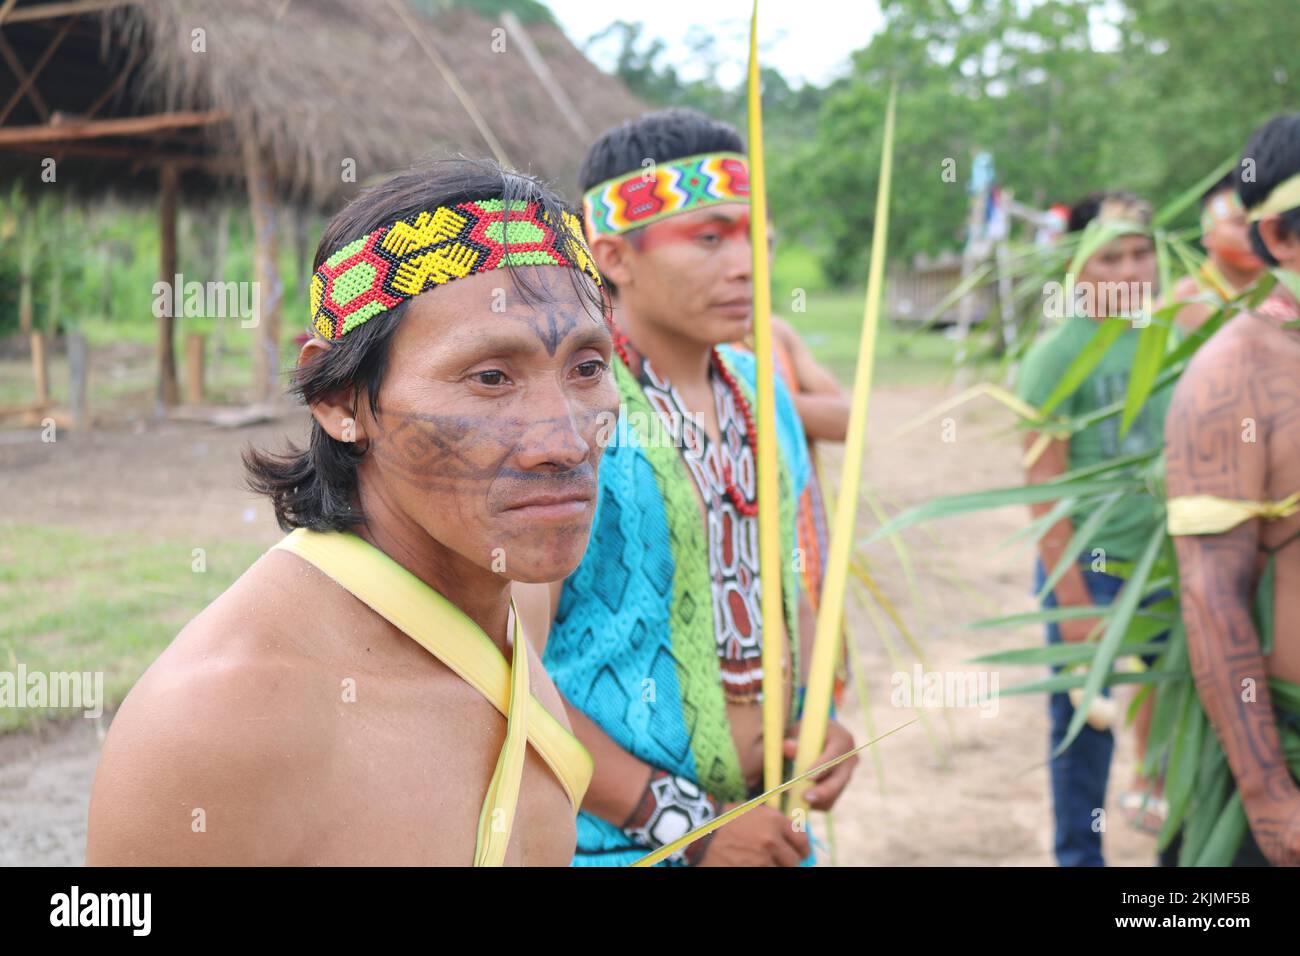 Indigenous people, Huni Kuin men decorated with plant leaves during a traditional ritual in their village in the Amazon rainforest, Acre, Brazil, Sout Stock Photo